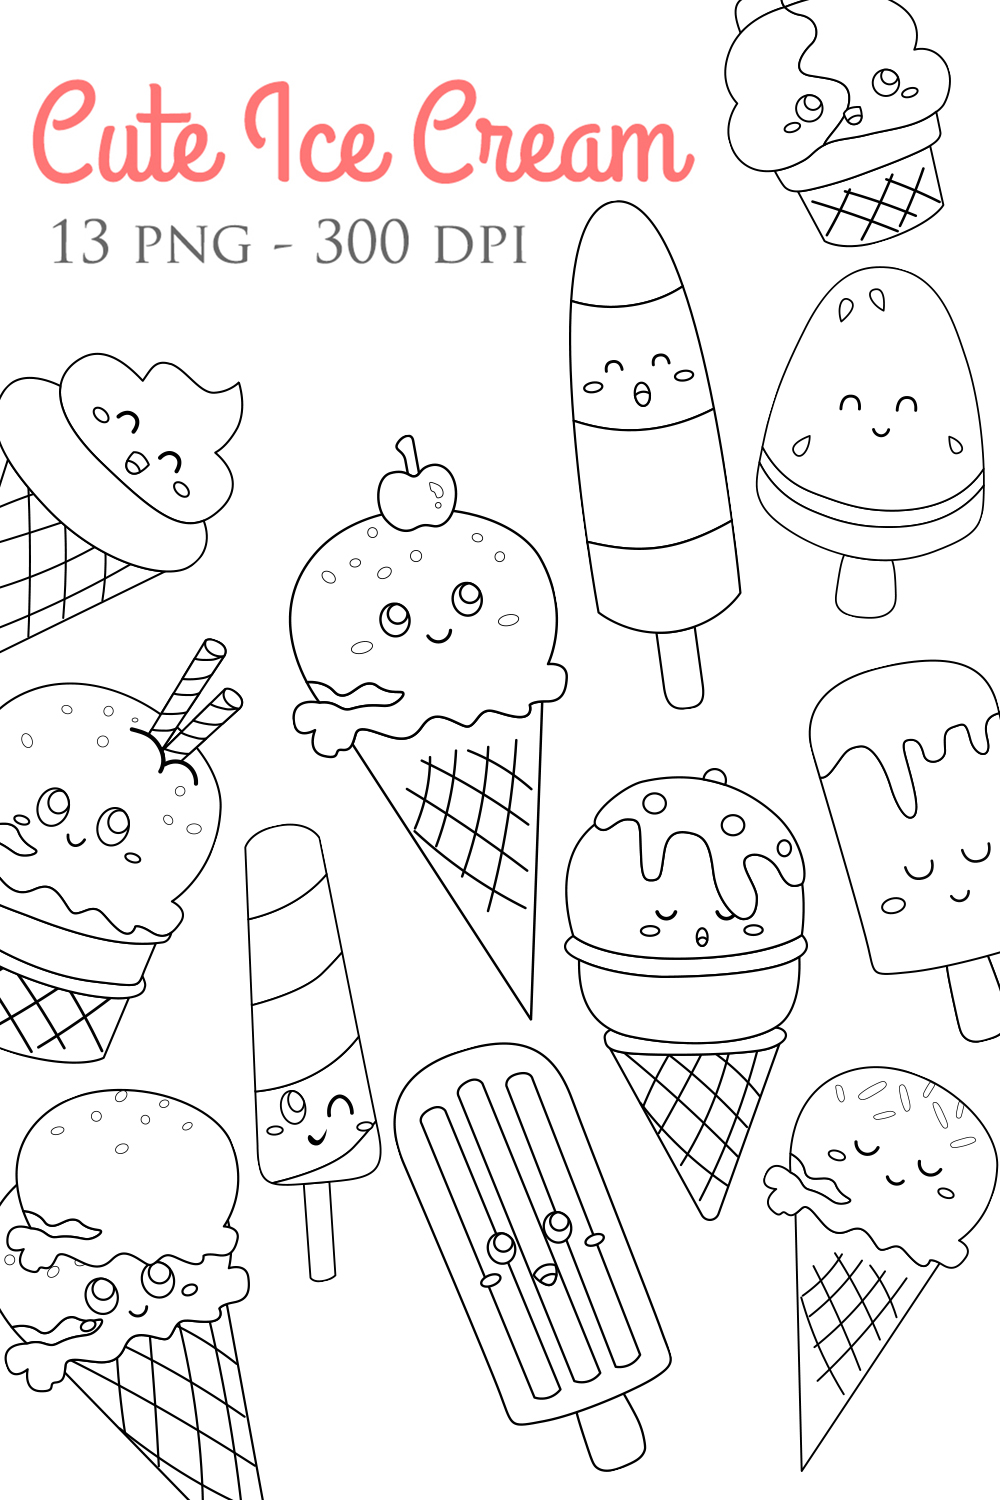 Cute Ice Cream Funny Flavor Dessert Snack Cone Scoop Stick Cup Fruit Sprinkle Chocolate Cherry Cartoon Digital Stamp Outline Black and White pinterest preview image.